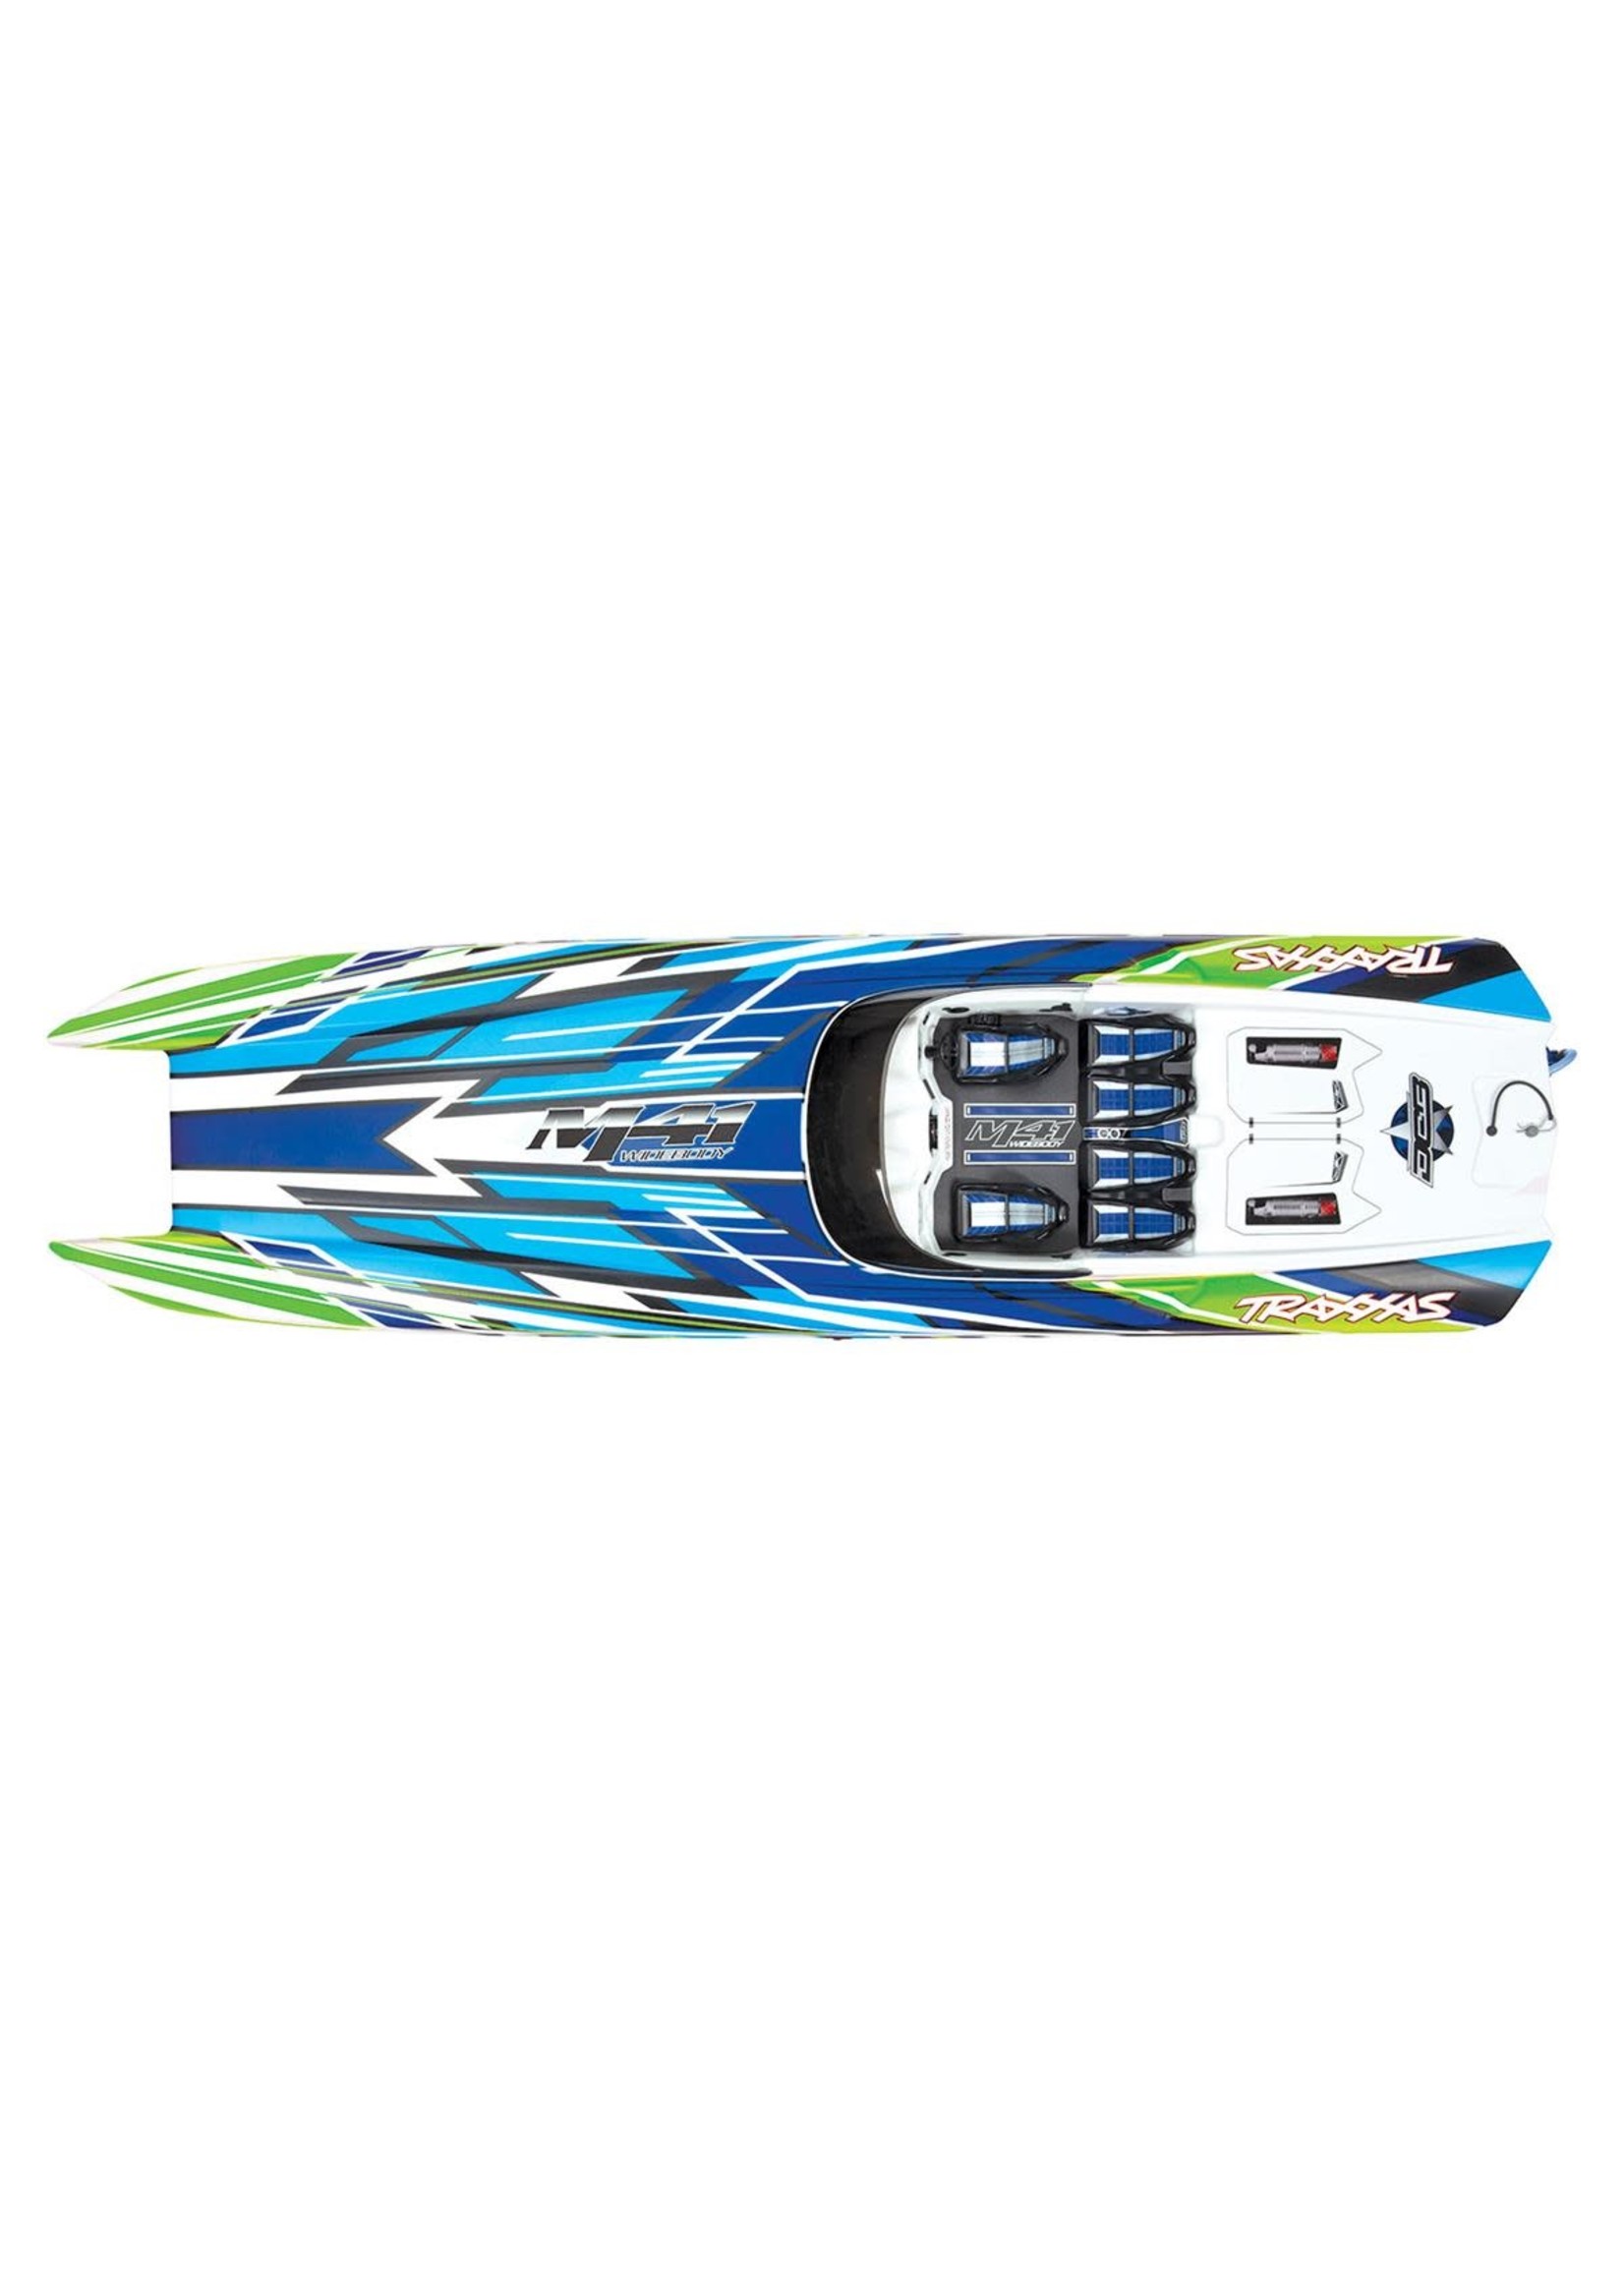 Traxxas 57046-4-GRNX DCB M41 Widebody: Brushless 40' Race Boat with TQi Traxxas Link  Enabled 2.4GHz Radio System & Traxxas Stability Management (TSM)